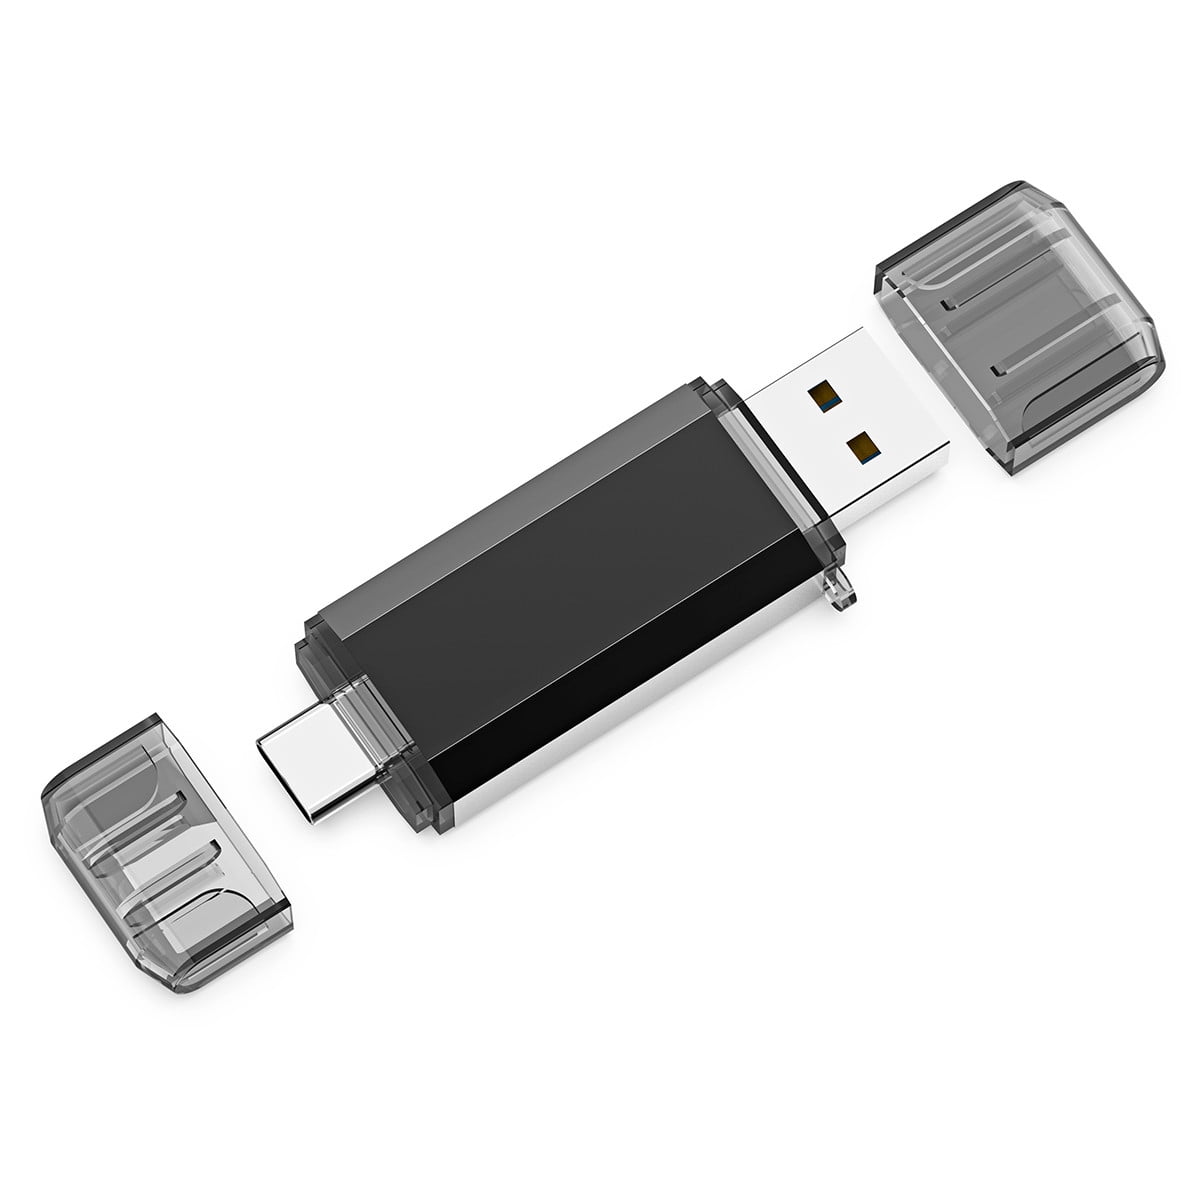 SSK 64GB USB C Flash Drive Dual Drive 2 in 1 OTG USB A 3.2 + Type C Memory  Stick Thumb Drive, Thunderbolt Pendrive up to 150MB/s Transfer Speed Photo